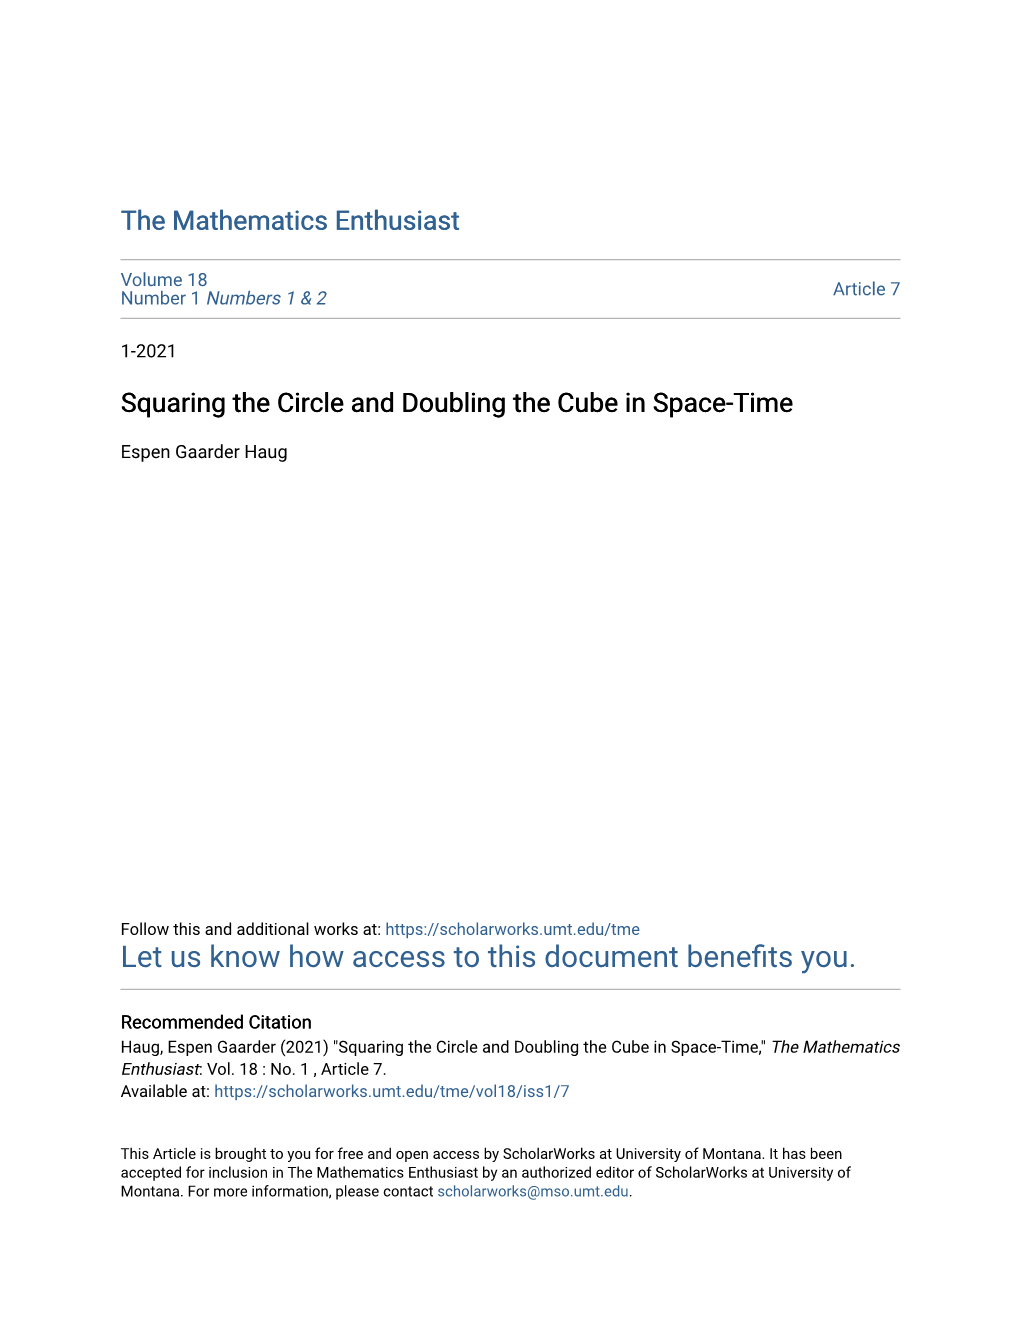 Squaring the Circle and Doubling the Cube in Space-Time